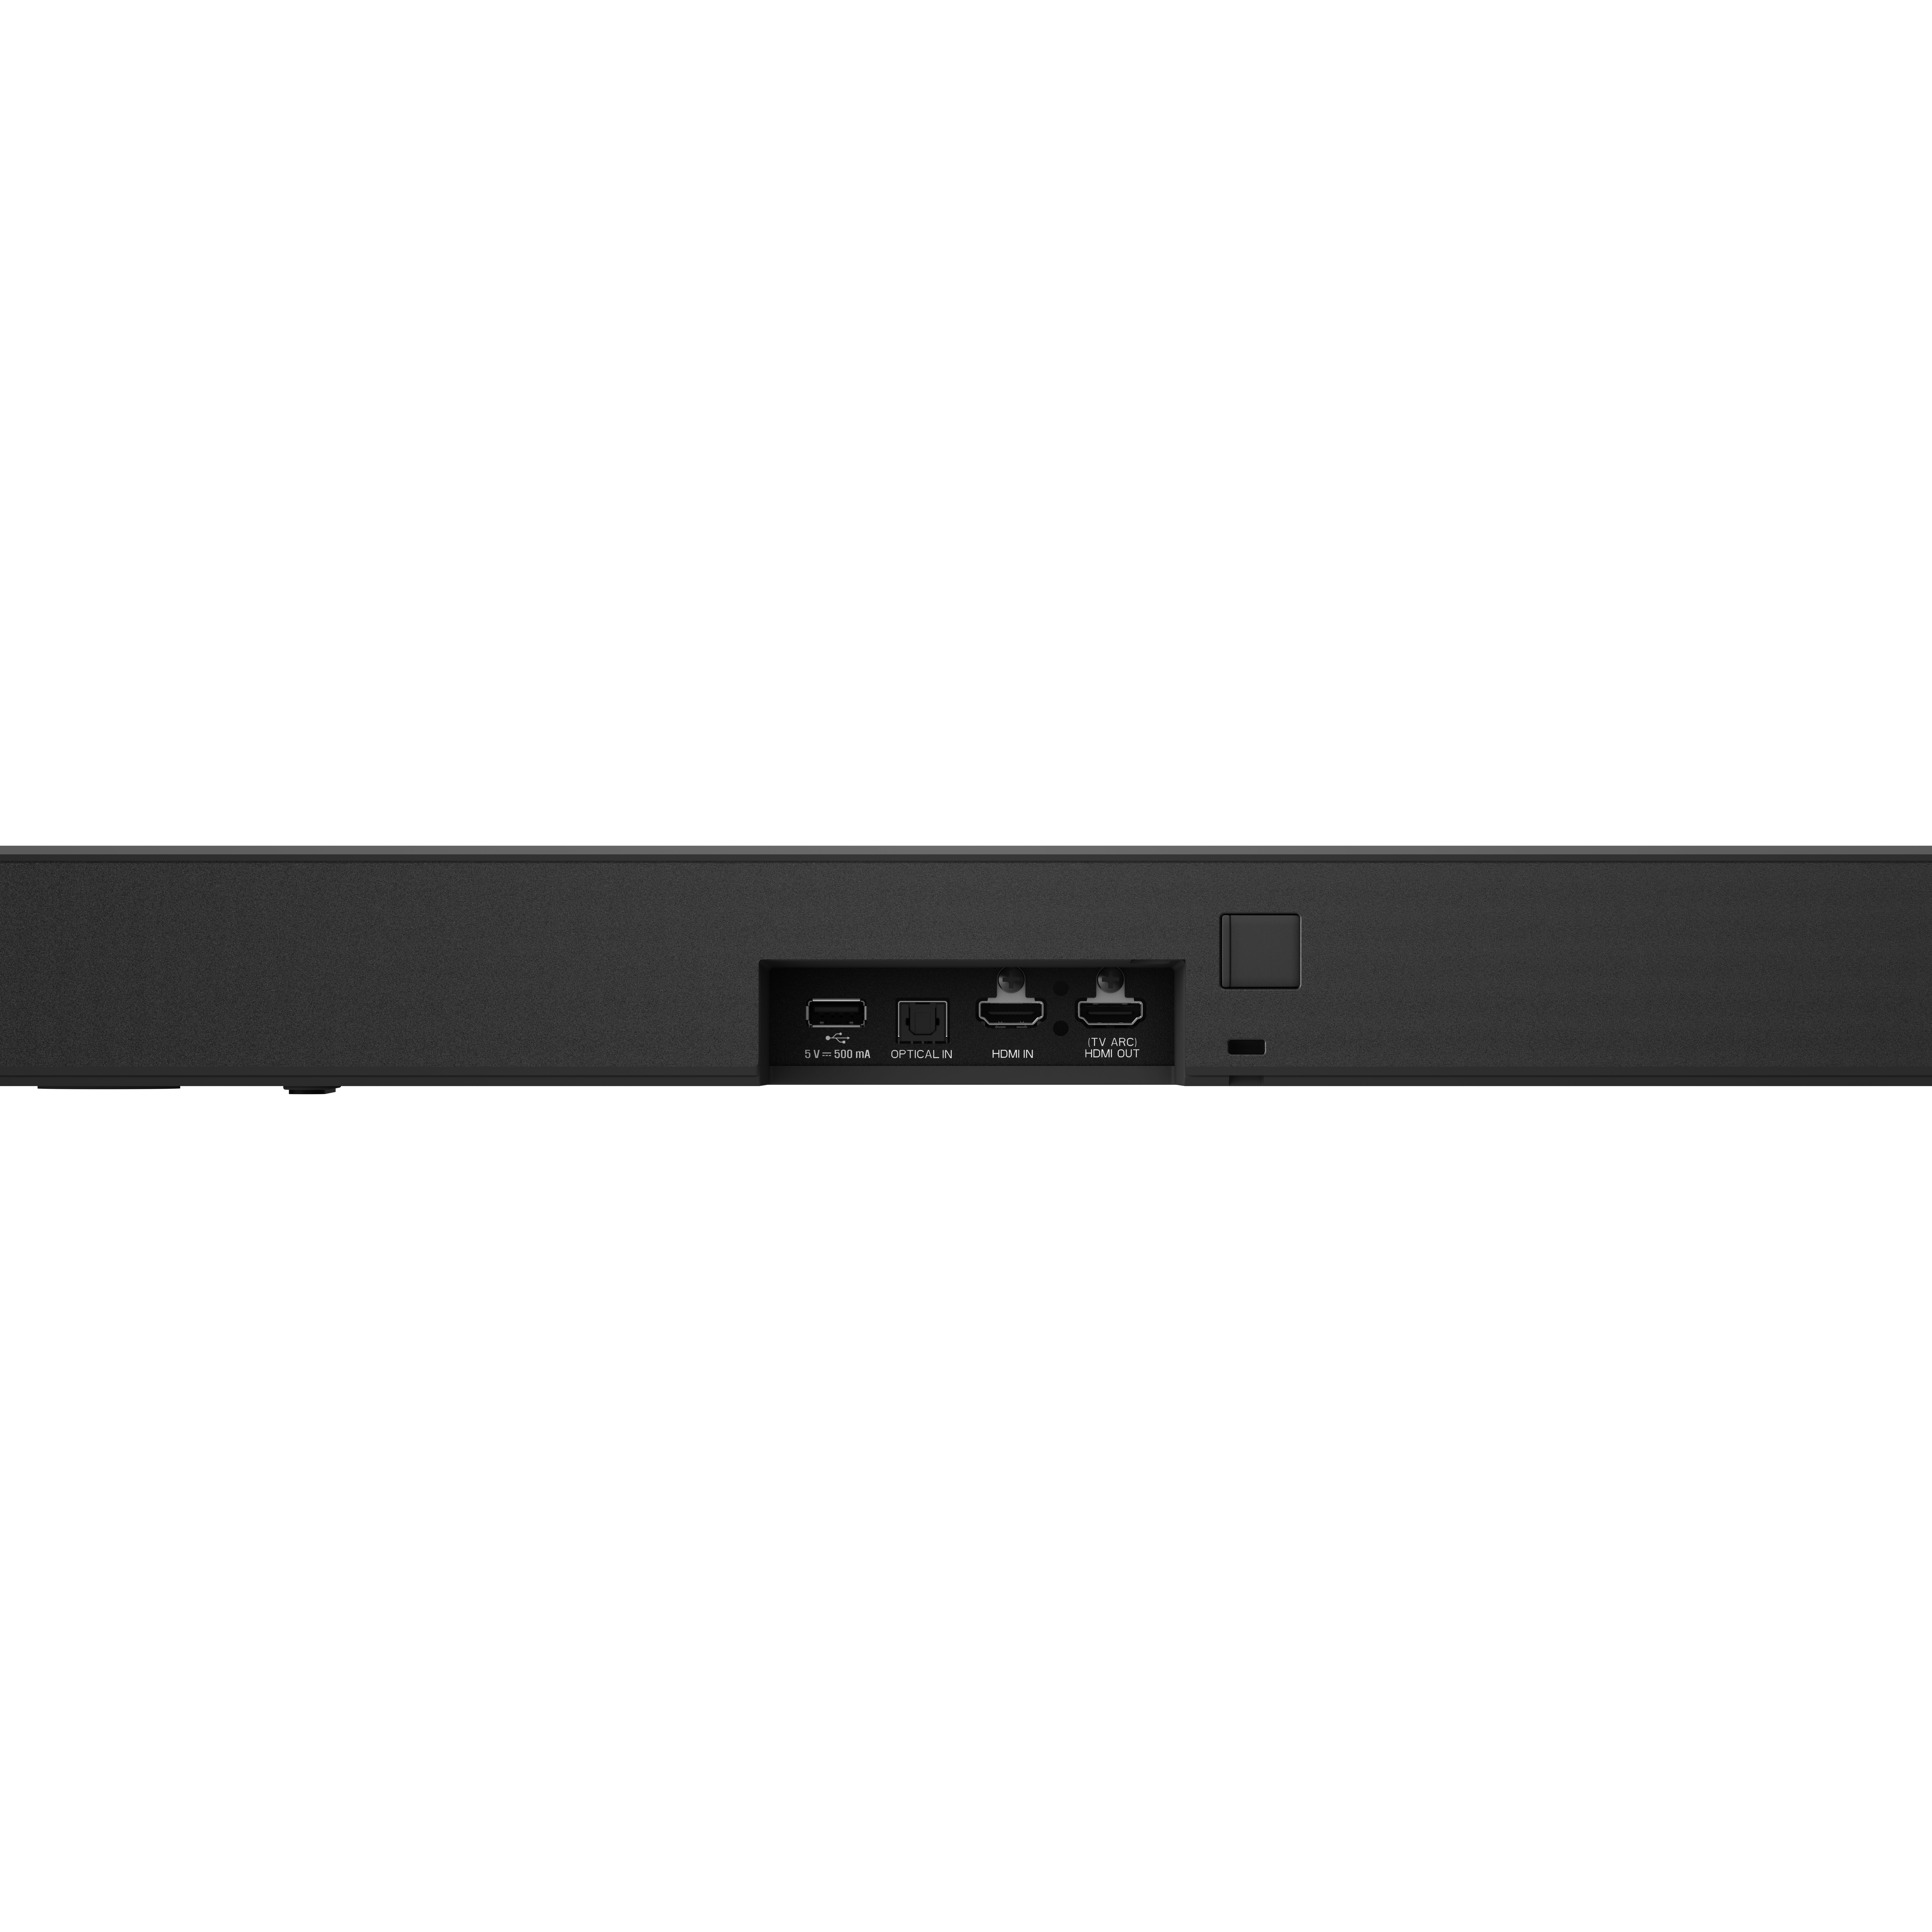 LG 3.1 Channel High Res Audio Sound Bar with DTS Virtual:X - SN6Y - image 4 of 19